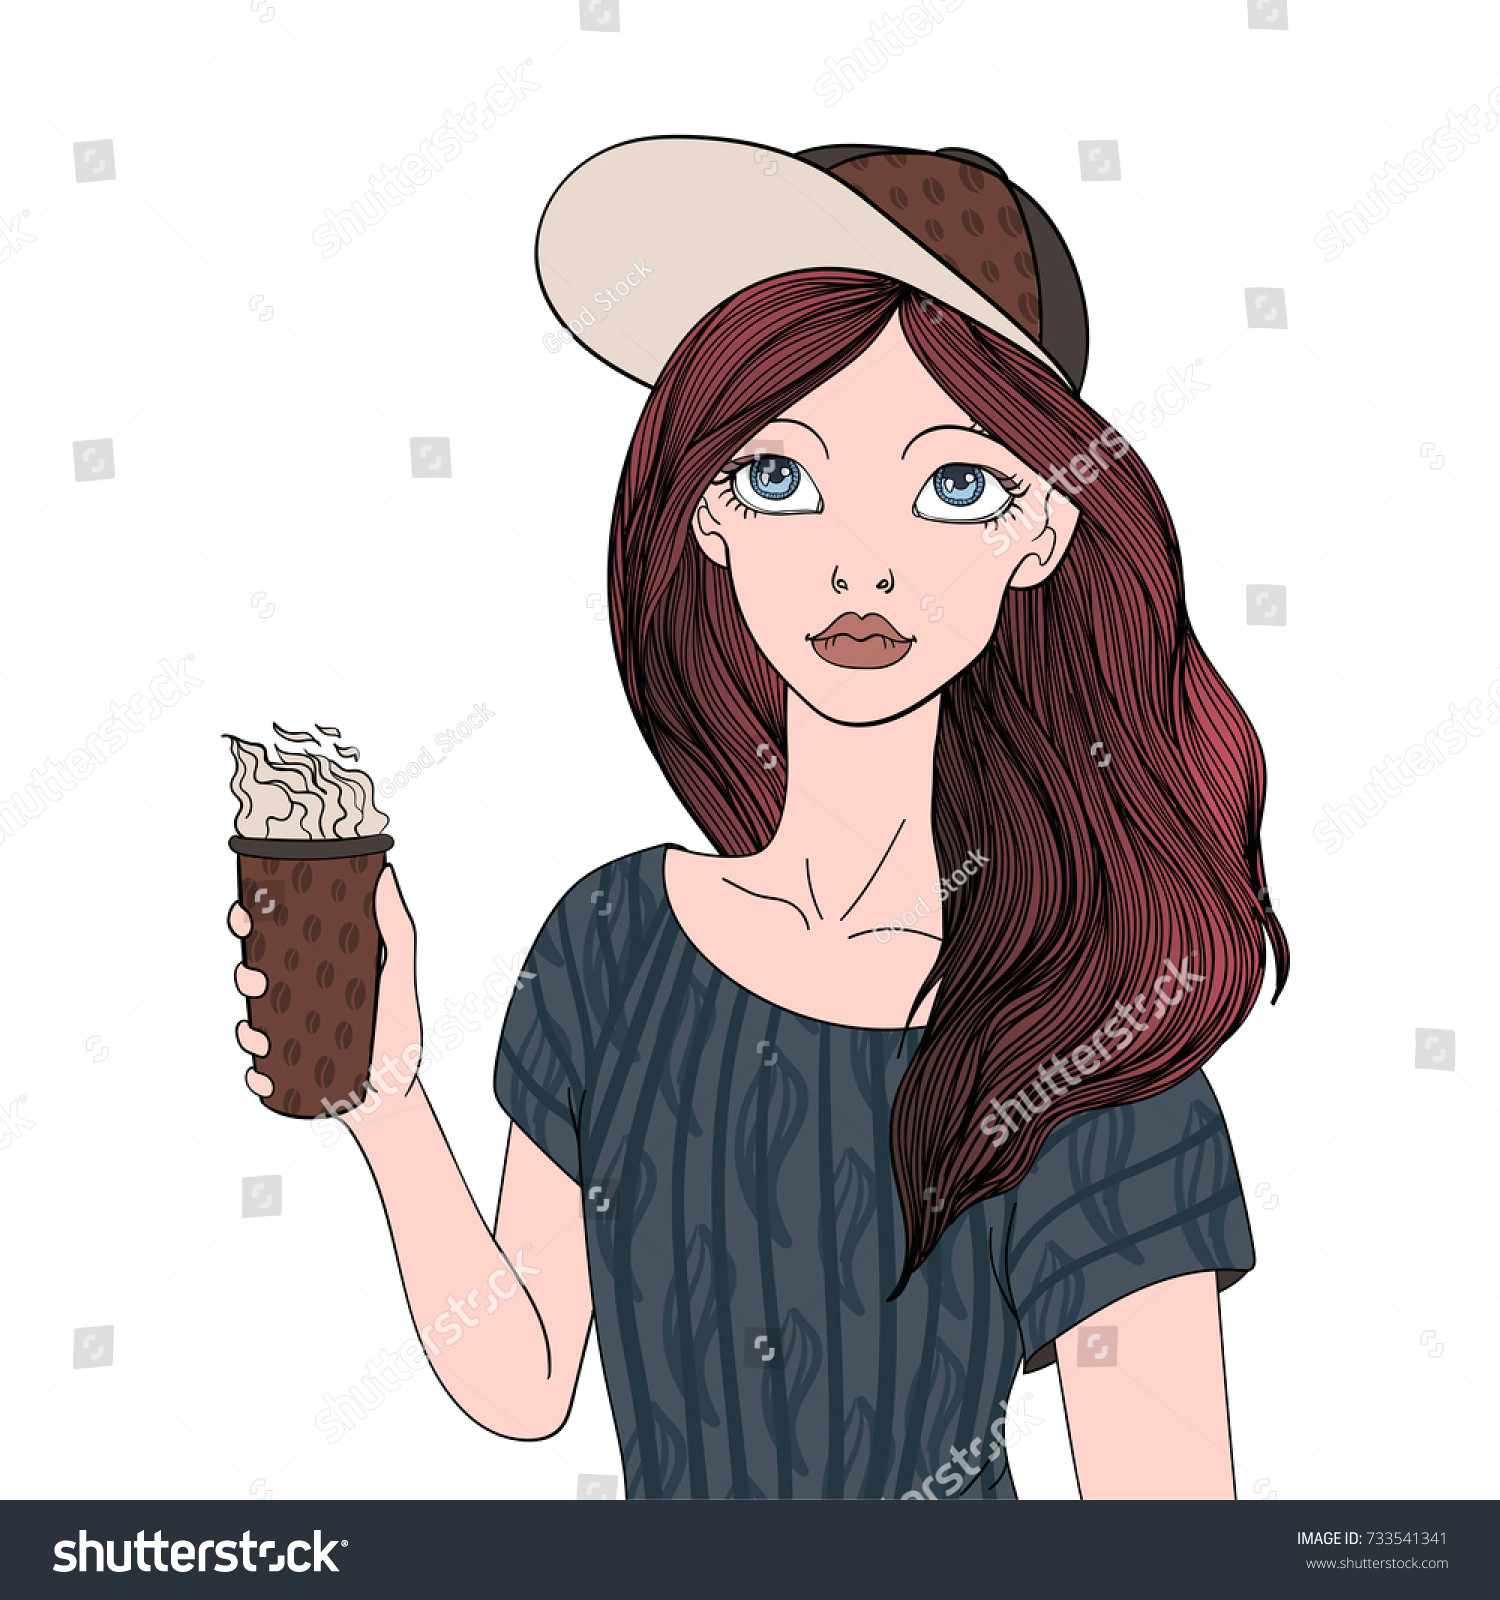 Drawing Of A Girl Holding A Phone Young Girl Holding Cup Coffee Hot Stock Illustration 733541341